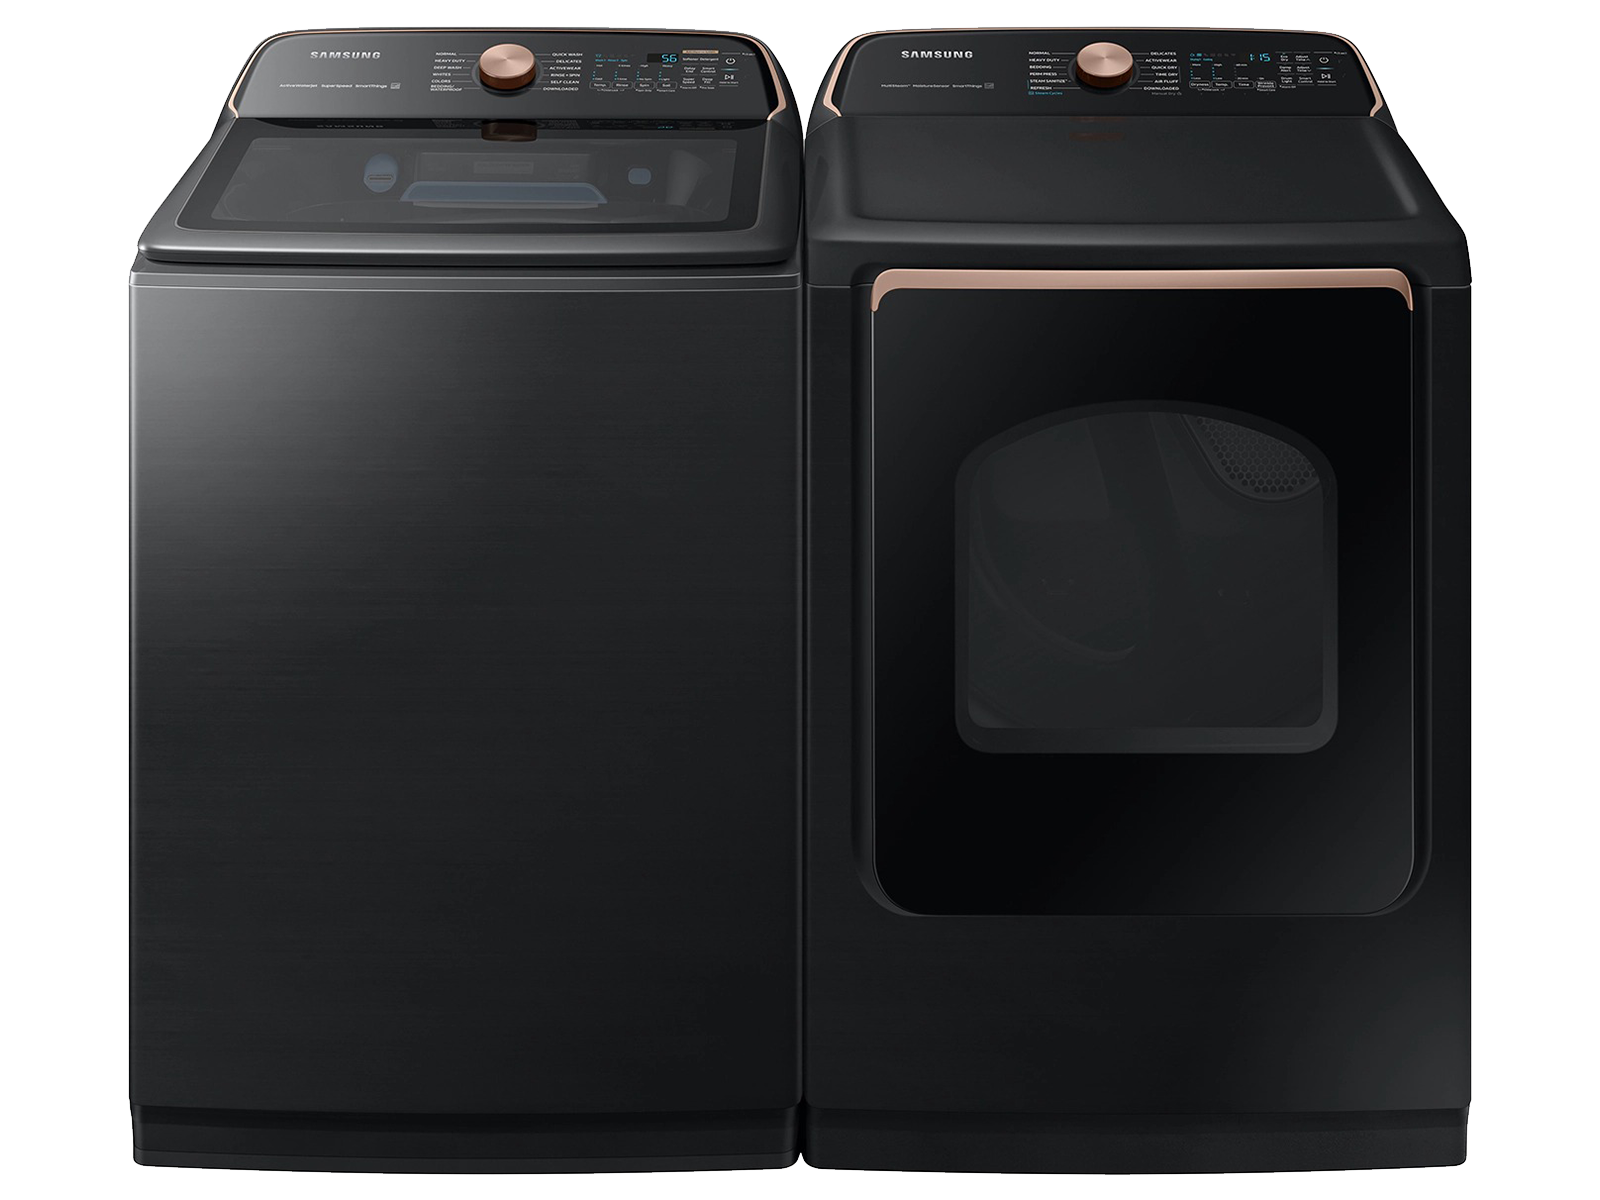 Photos - Tumble Dryer Samsung Smart Top Load Smart Steam Sanitize+ Washer and Steam Sanitize+ Ga 